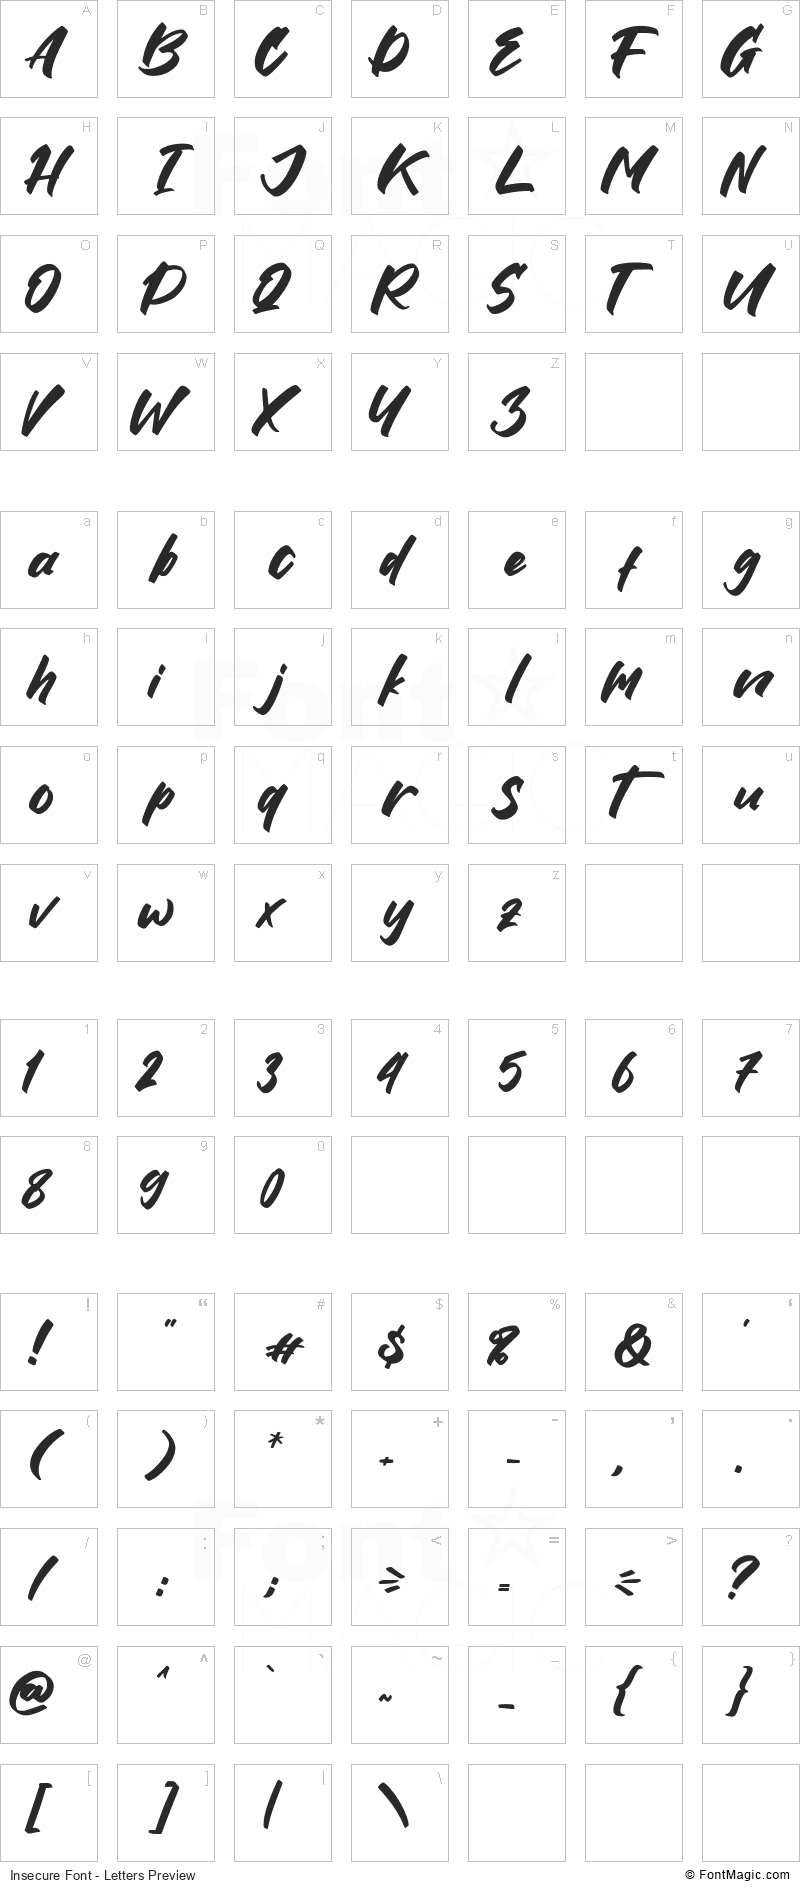 Insecure Font - All Latters Preview Chart